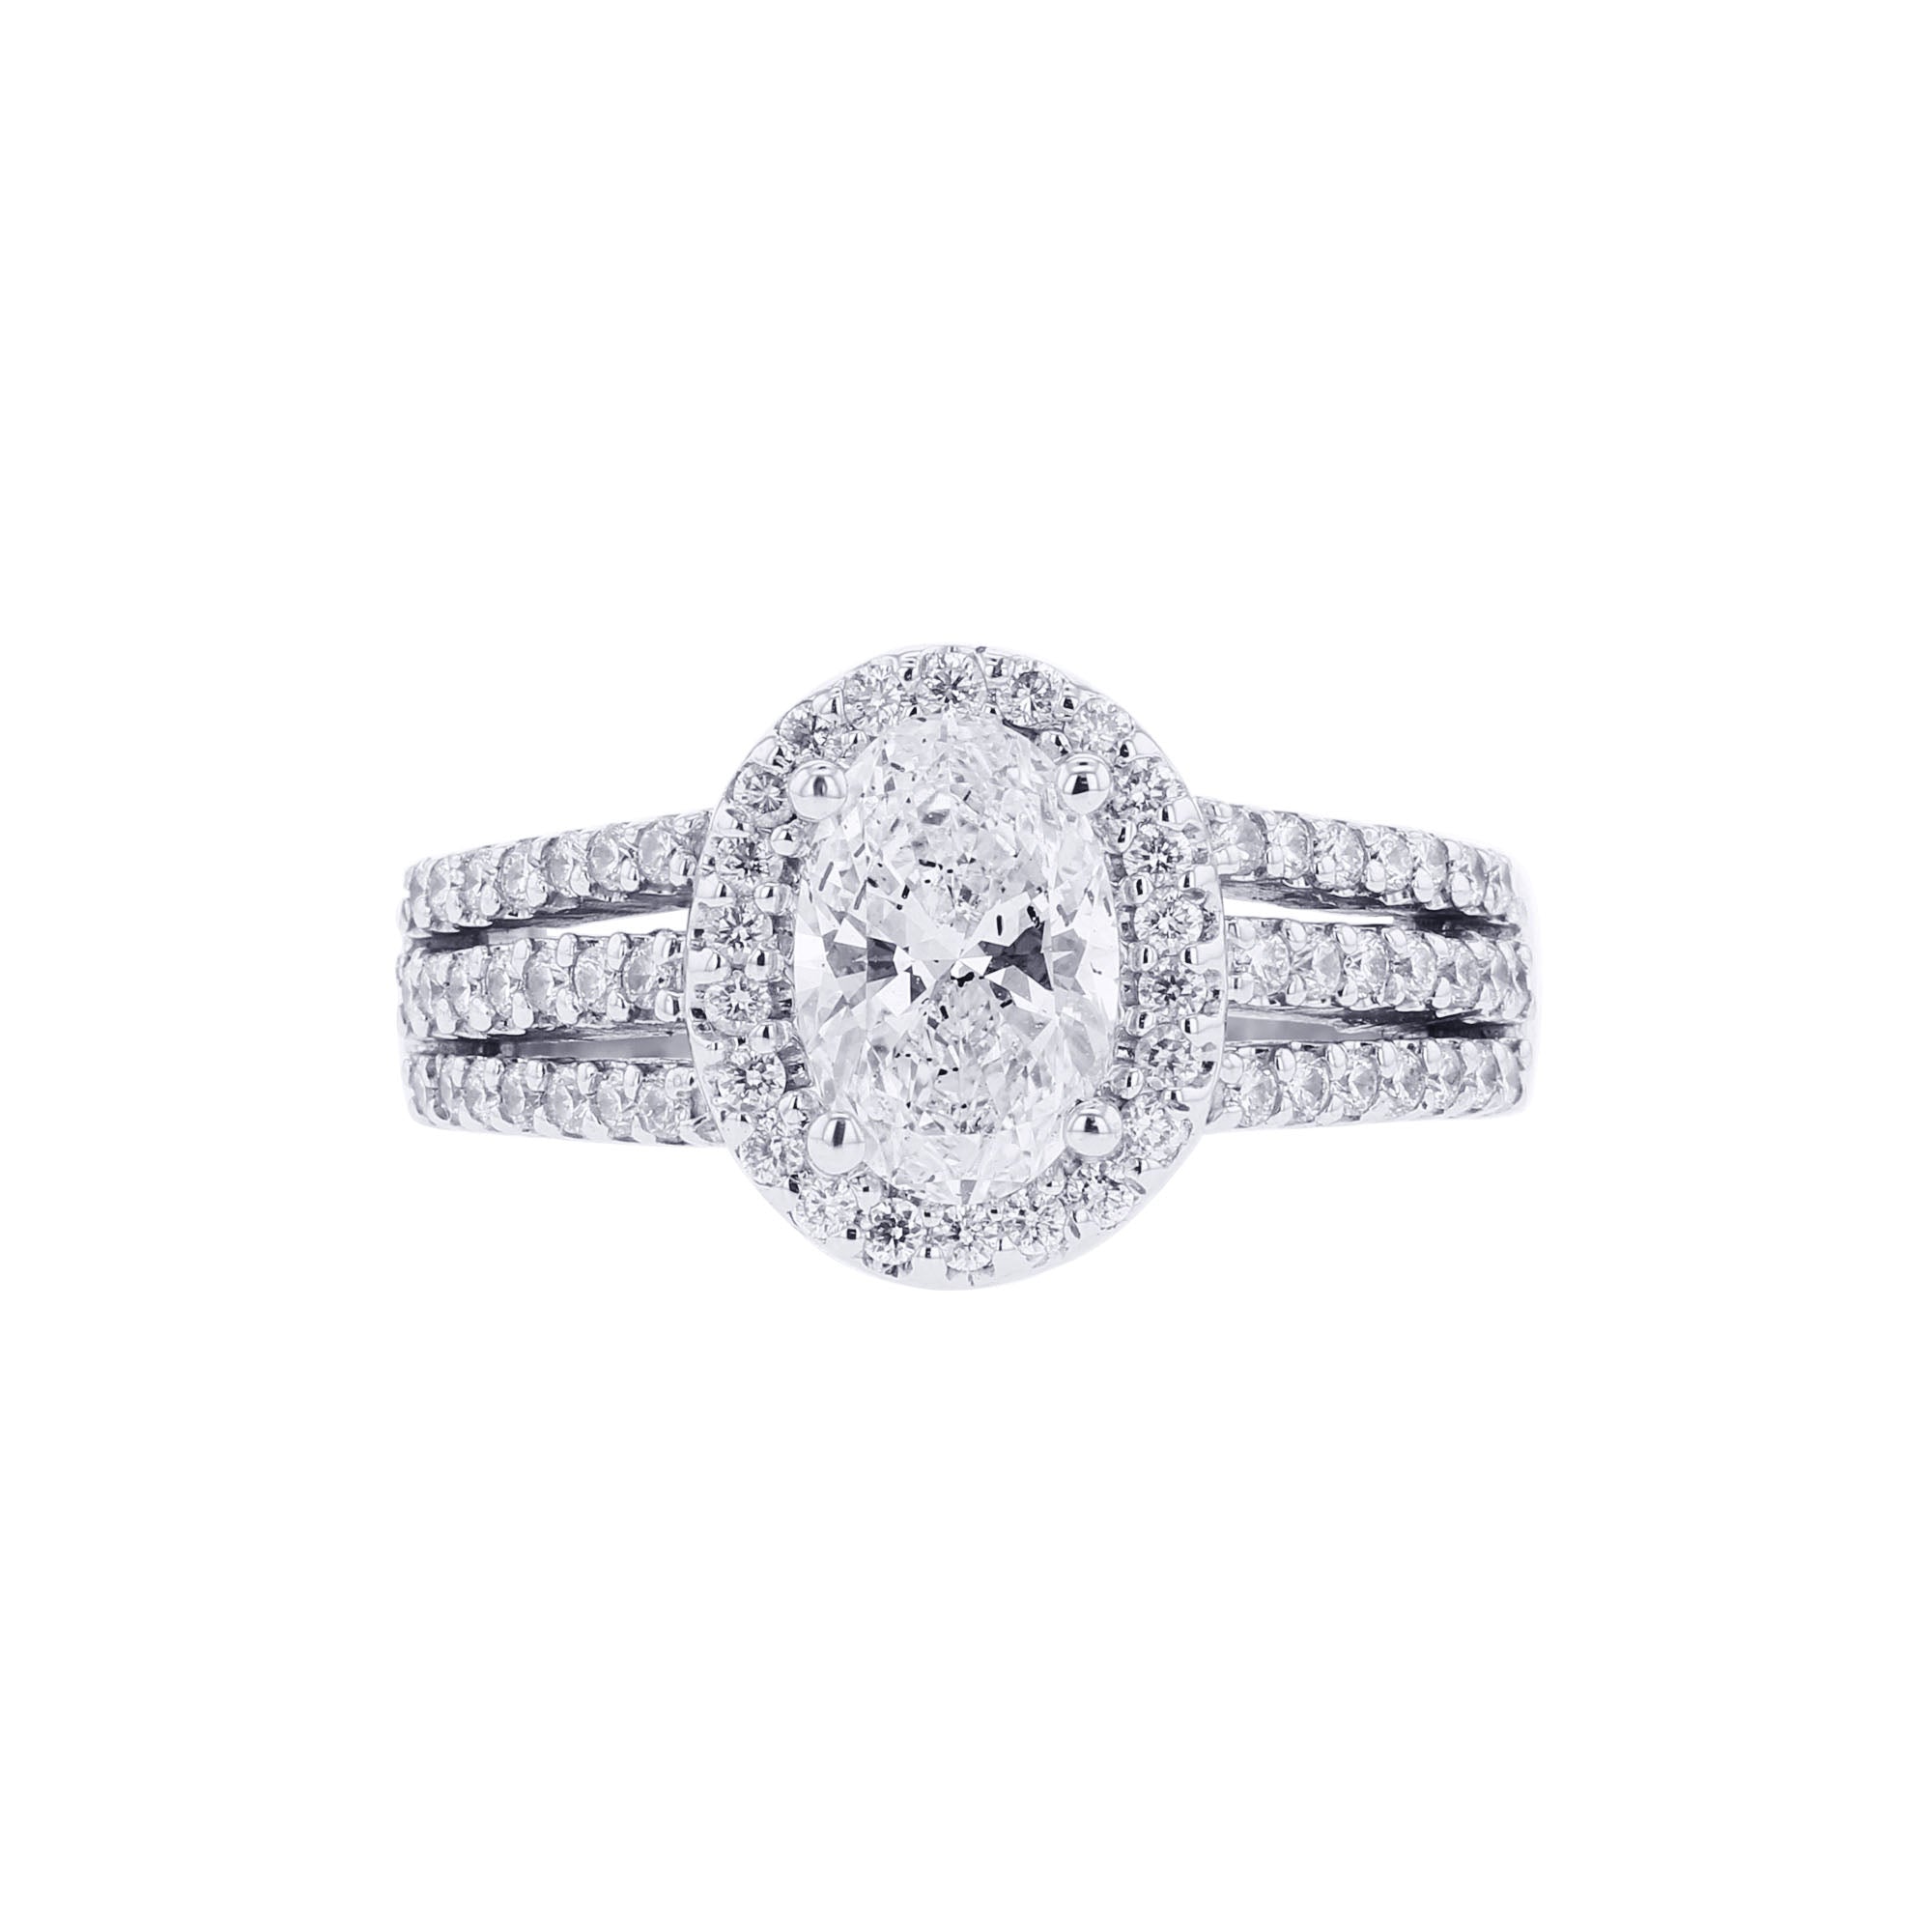 Kaylee Certified Ready for Love Diamond Engagement Ring 1 3/8ct